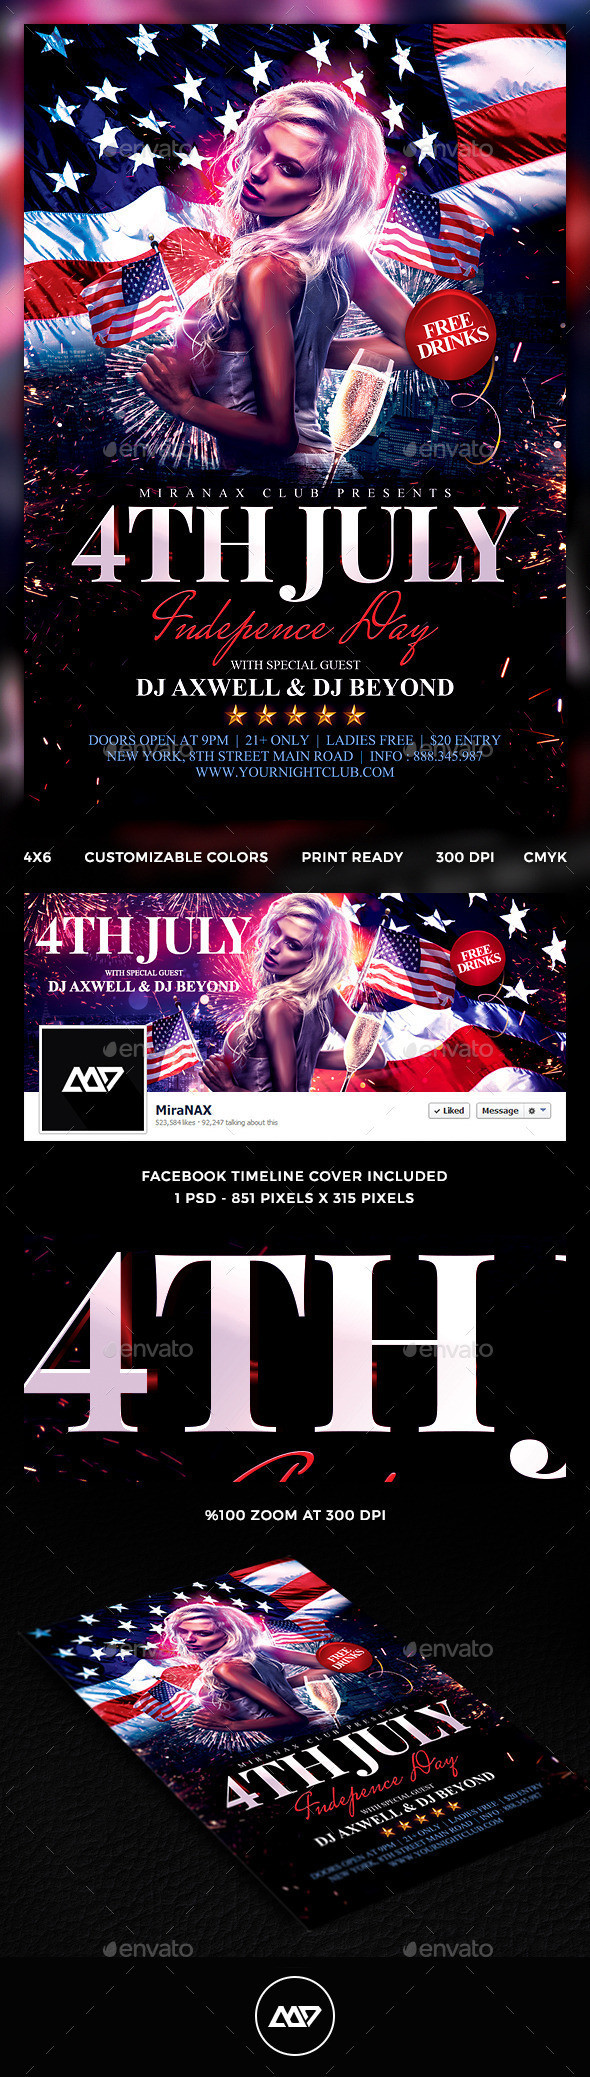 4th 20of 20july 20flyer 20template 20psd